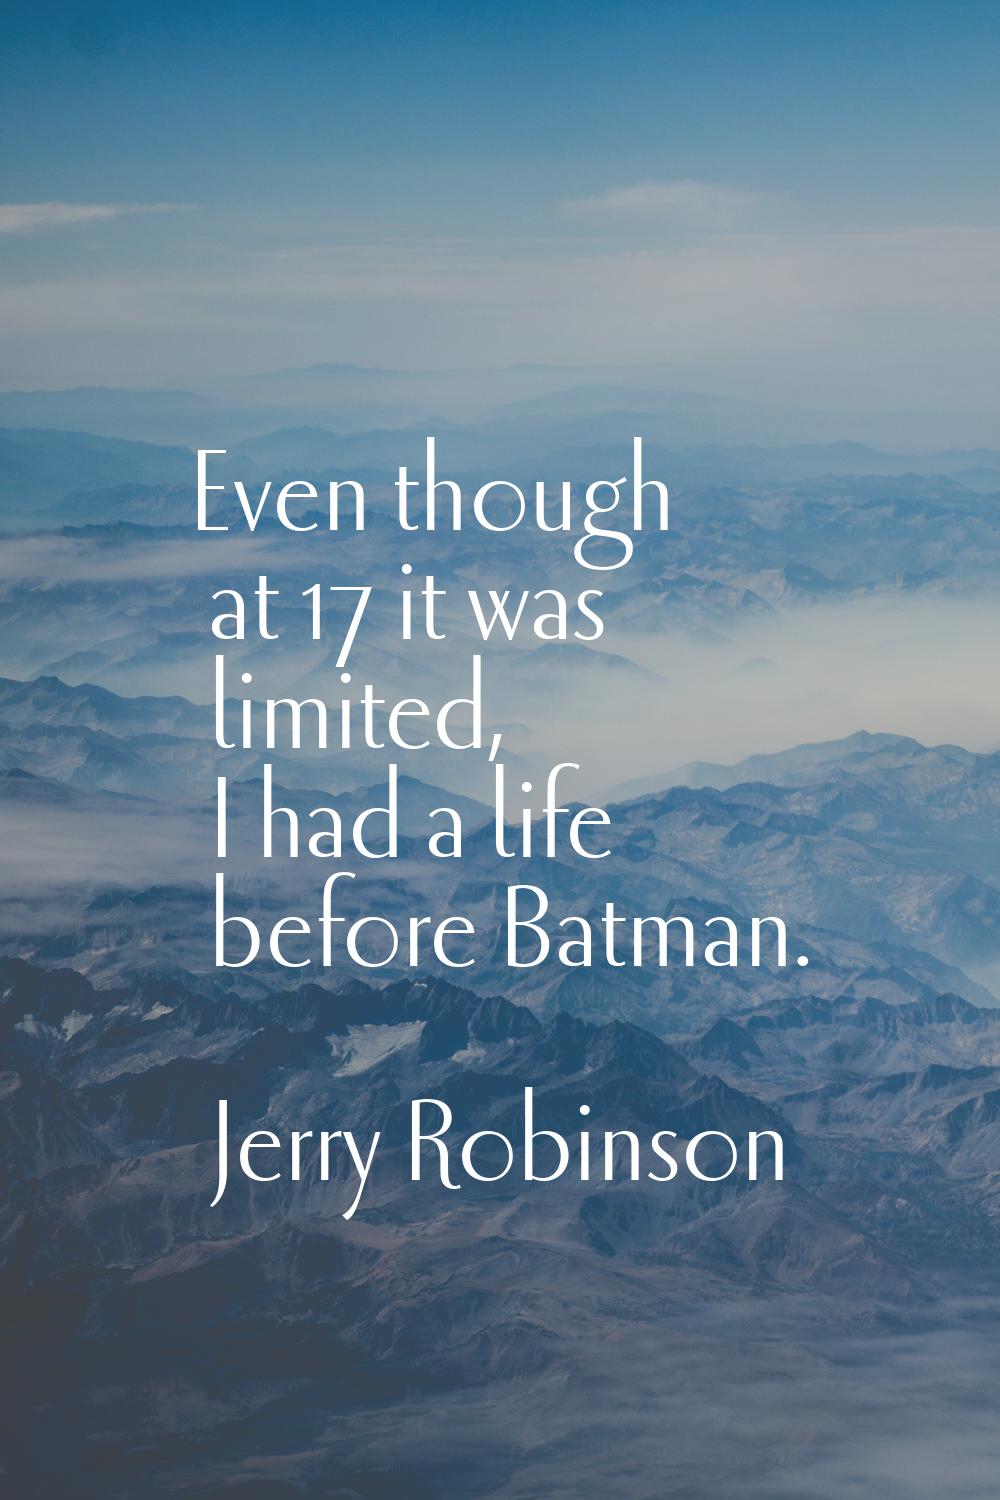 Even though at 17 it was limited, I had a life before Batman.